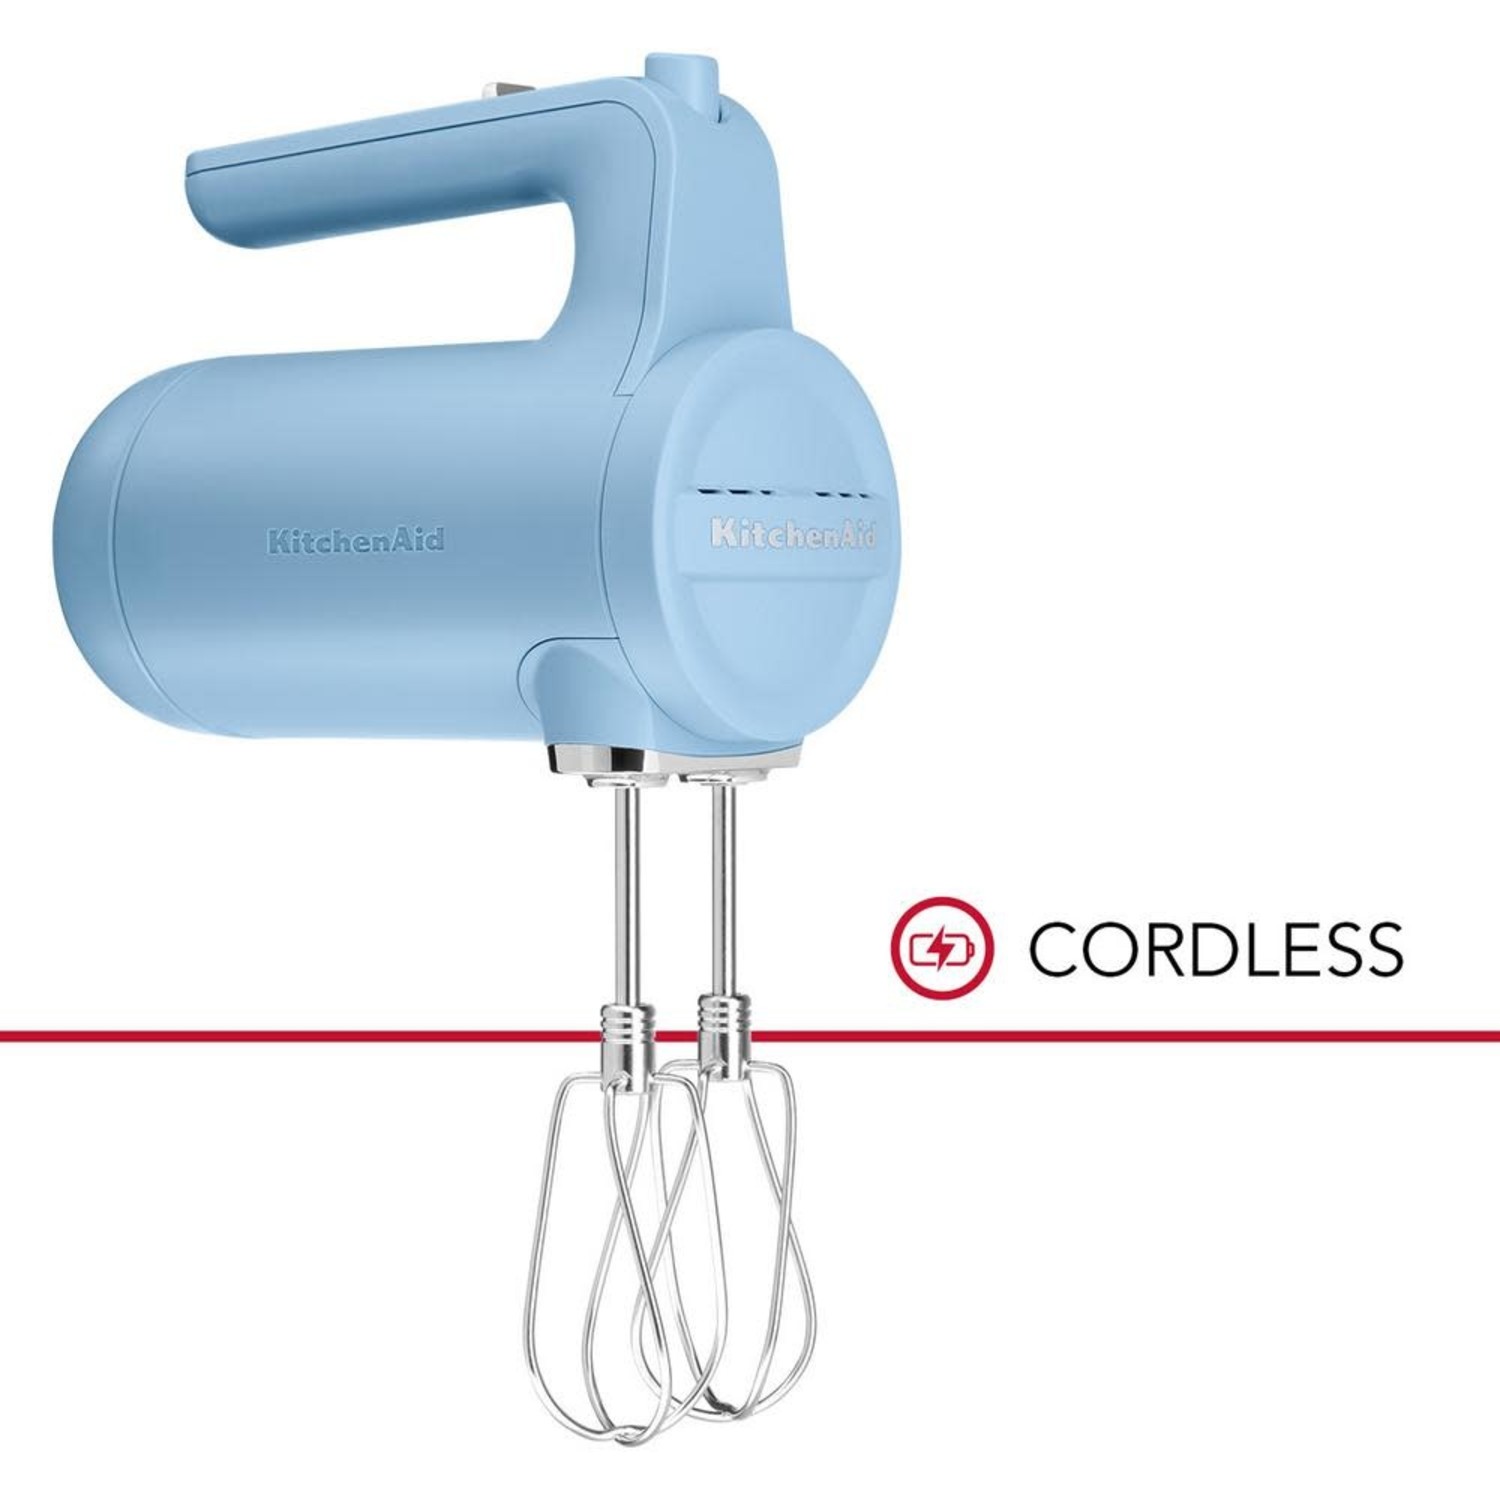  Wonderper Cordless Hand Mixer Battery Operated Mixer Battery  Hand Mixer Battery Operated Hand Mixer Cordless Mixer Rechargeable - Blue:  Home & Kitchen